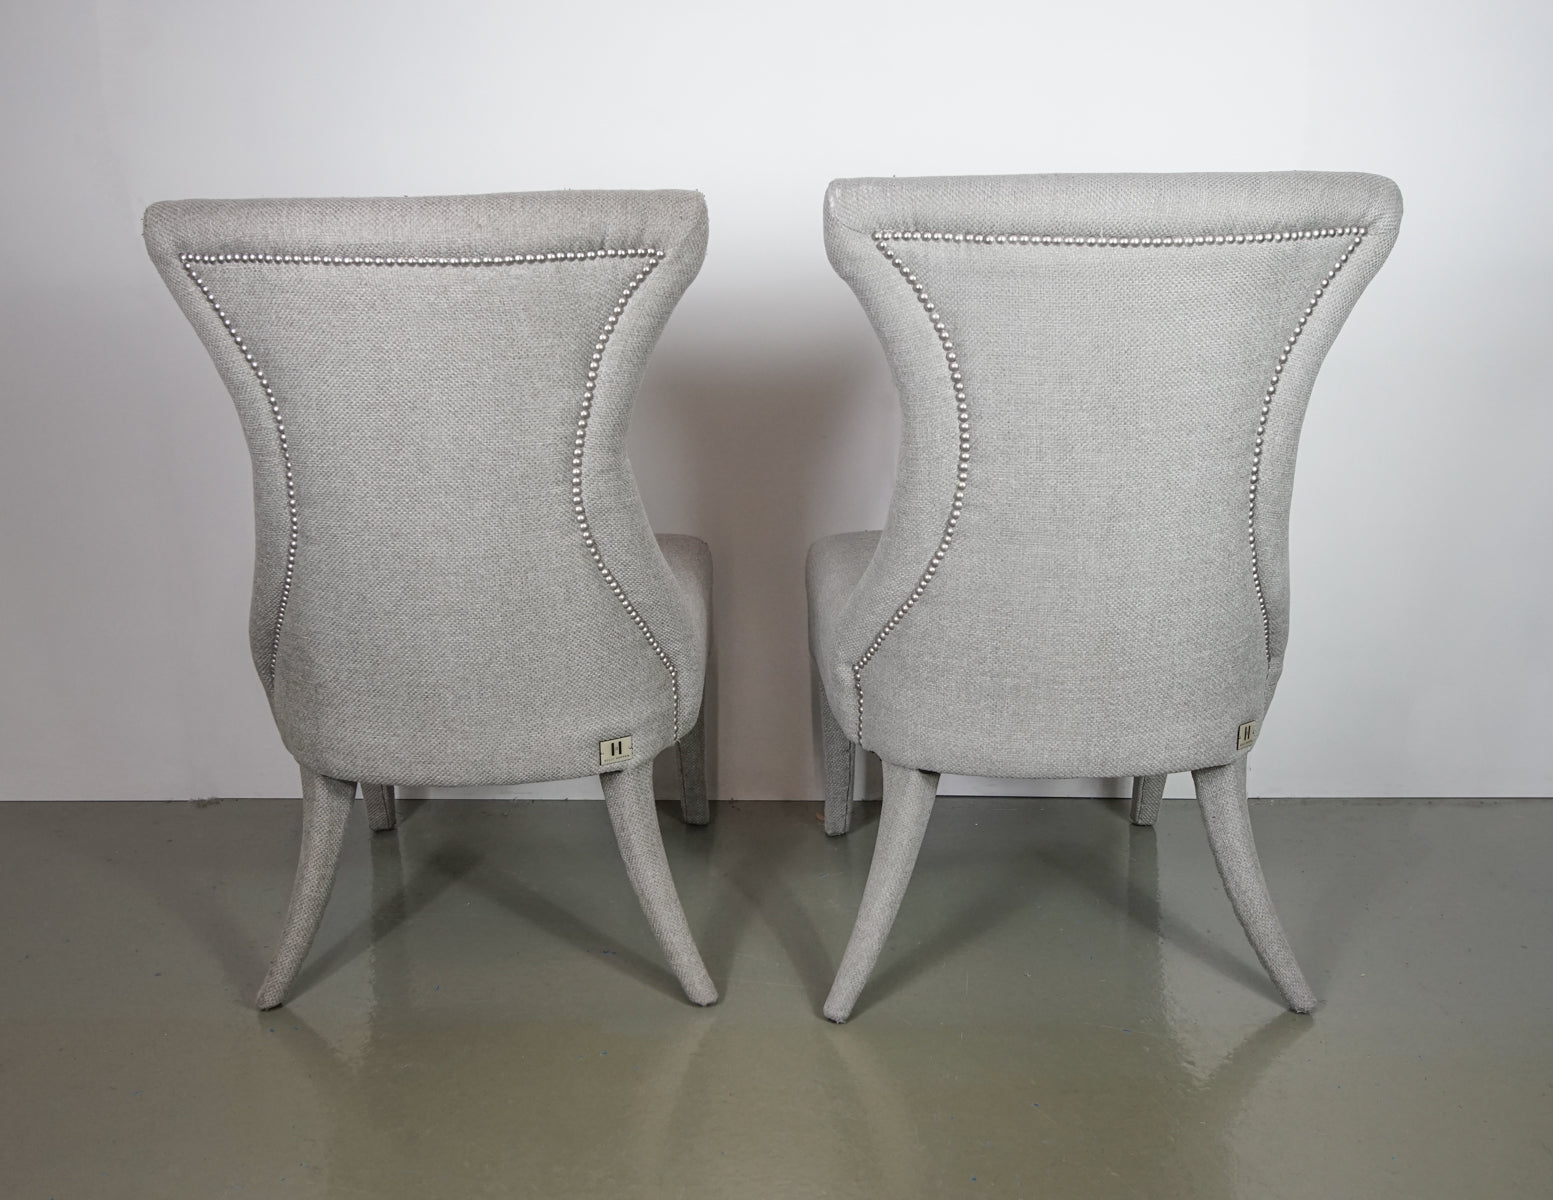 Kelly Hoppen Chairs (2 units)